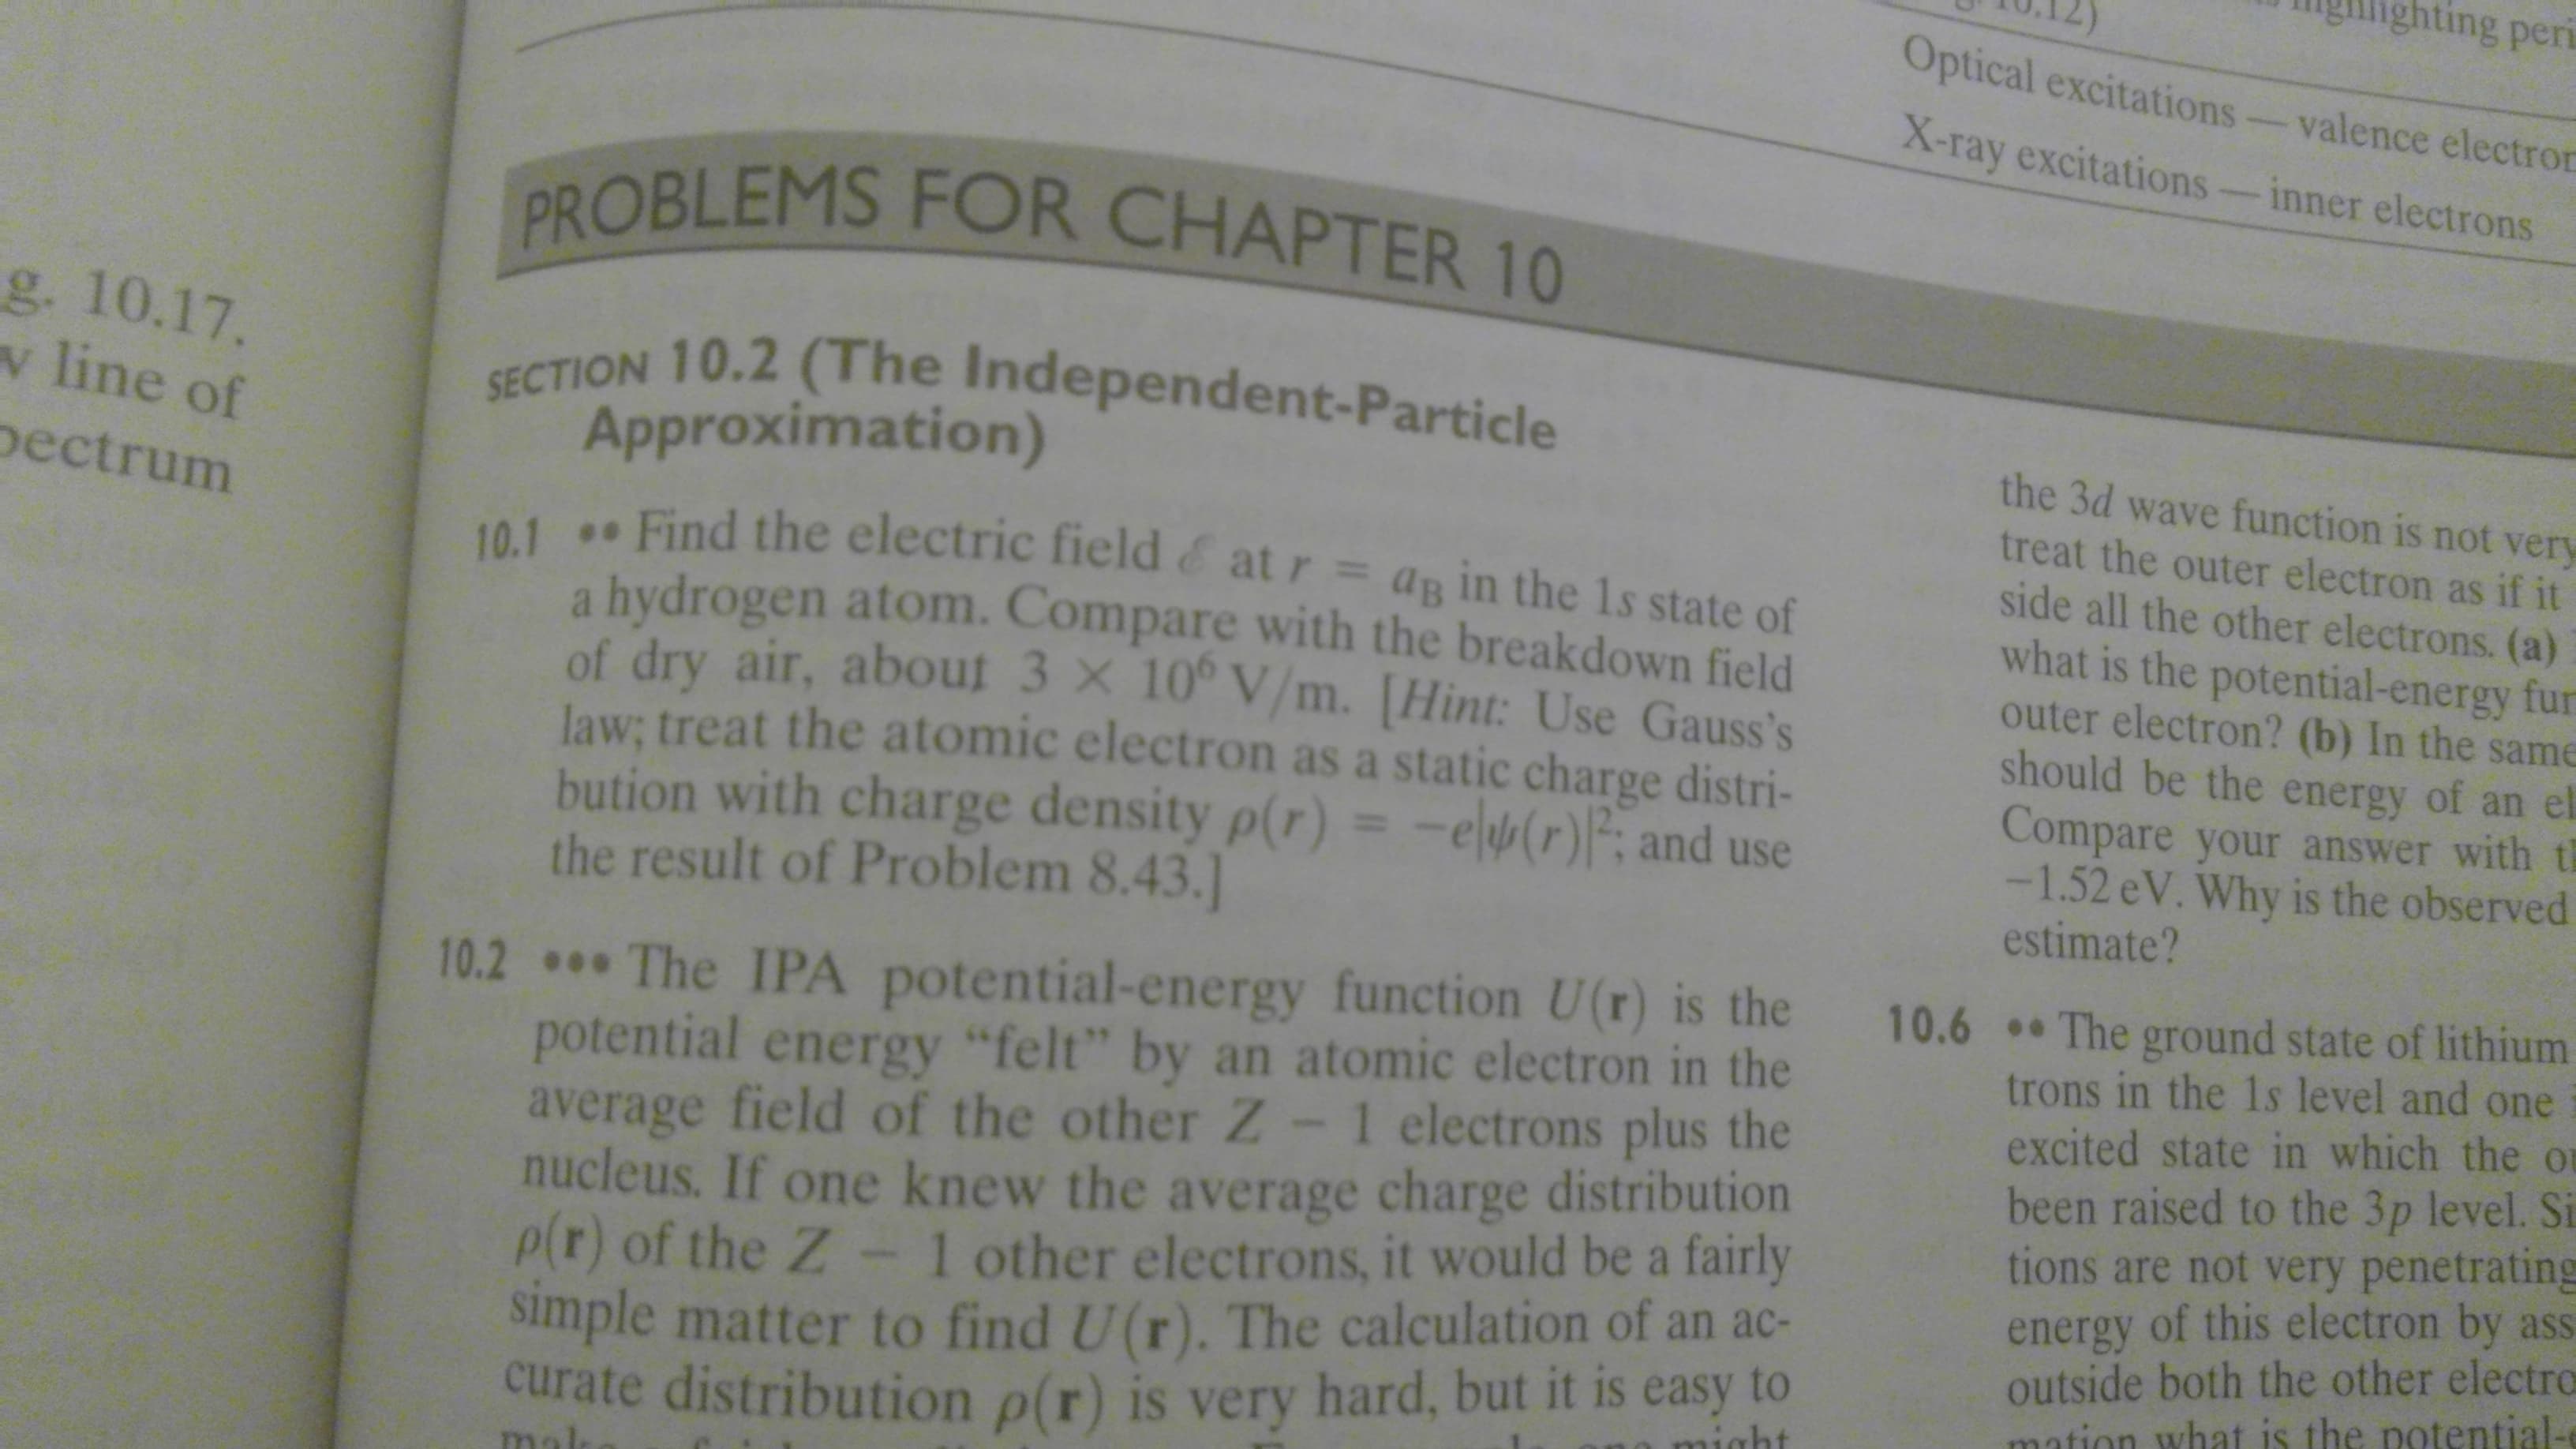 ing peri
Optical excitations
valence electron
X-таy excitations
inner electrons
PROBLEMS FOR CHAPTER 10
g. 10.17.
v line of
SECTION 10.2 (The Independent-Particle
the 3d wave function is not very
treat the outer electron as if it
side all the other electrons. (a)
what is the potential-energy fur
outer electron? (b) In the same
should be the energy of an el
Compare your answer with t
-1.52 eV. Why is the observed
estimate?
Approximation)
ectrum
10.1 Find the electric field & at r = ag in the 1s state of
a hydrogen atom. Compare with the breakdown field
of dry air, about 3 x 10° V/m. [Hint: Use Gauss's
law; treat the atomic electron as a static charge distri-
bution with charge density p(r) = -e(r)P and use
the result of Problem 8.43.]
10.2 The IPA potential-energy function U(r) is the
potential energy "felt" by an atomic electron in the
average field of the other Z - 1 electrons plus the
nucleus. If one knew the average charge distribution
P r) of the Z - 1 other electrons, it would be a fairly
simple matter to find U(r). The calculation of an ac-
curate distribution p(r) is very hard, but it is easy to
10.6 The ground state of lithium
trons in the 1s level and one
excited state in which the o
been raised to the 3p level. Si
tions are not very penetrating
energy of this electron by
outside both the other electro
mation what is the potential-
aht
mol
